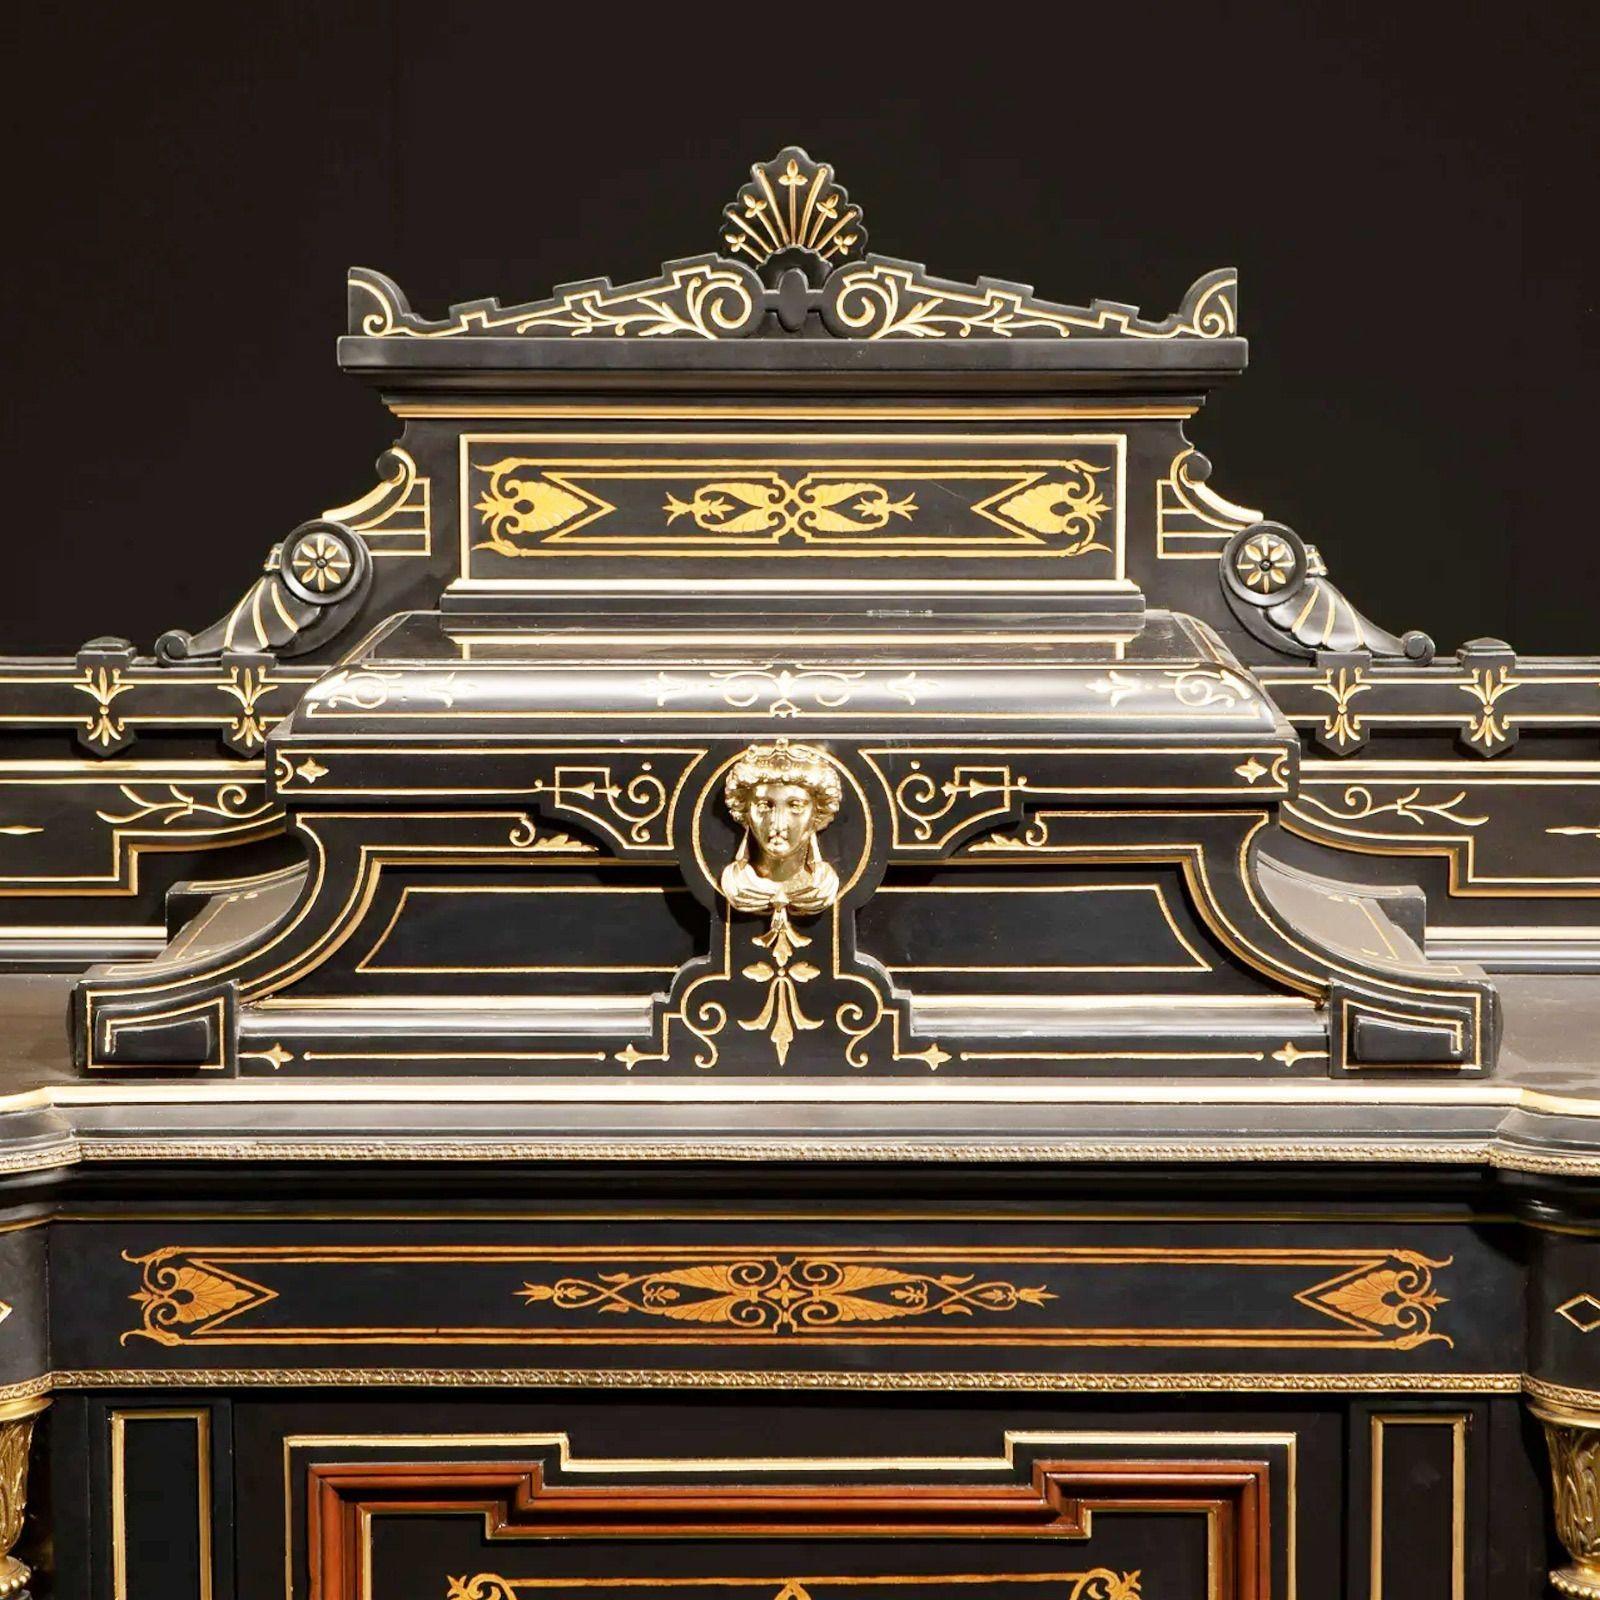 American victorian renaissance revival cabinet with over the top inlaid, Late 19th century

Ebonized walnut with marquetry inlay, gold enamel highlighted features, and patinated bronze mounts
 
Dimensions:

62